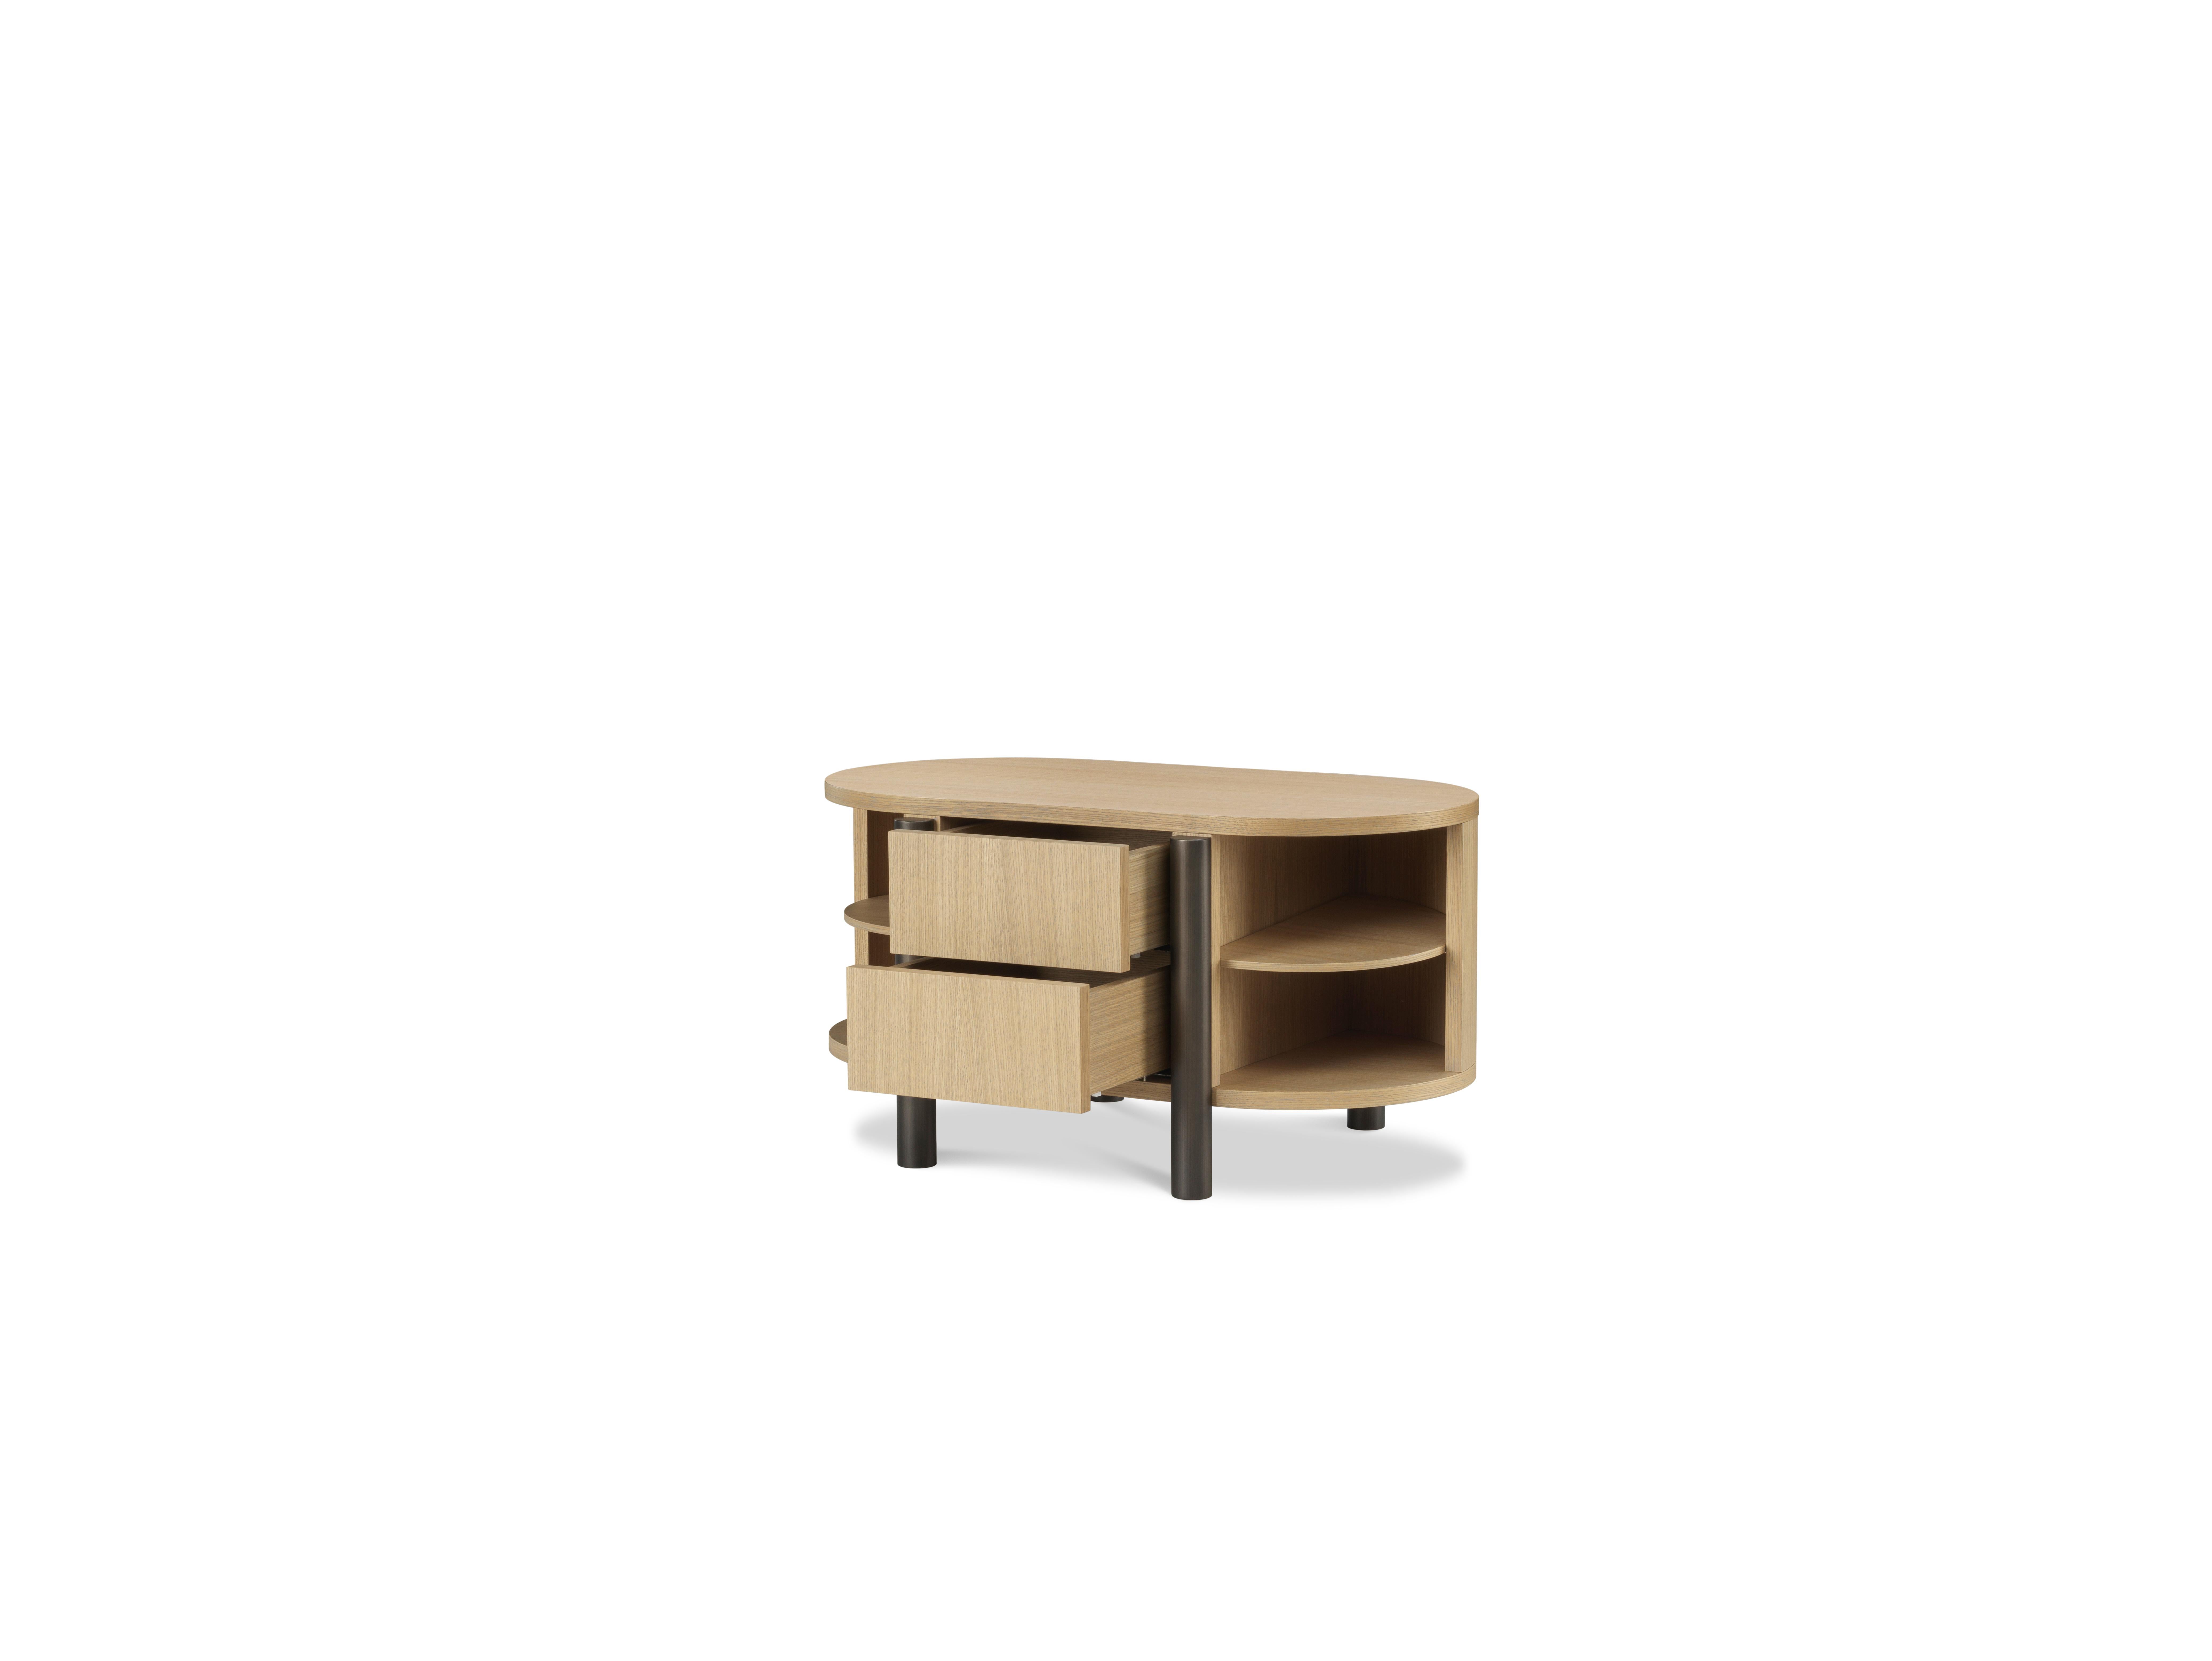 Italian Tarantino Bedside Table, Wood 'Oak' and Burnished Brass Structure, Made in Italy For Sale